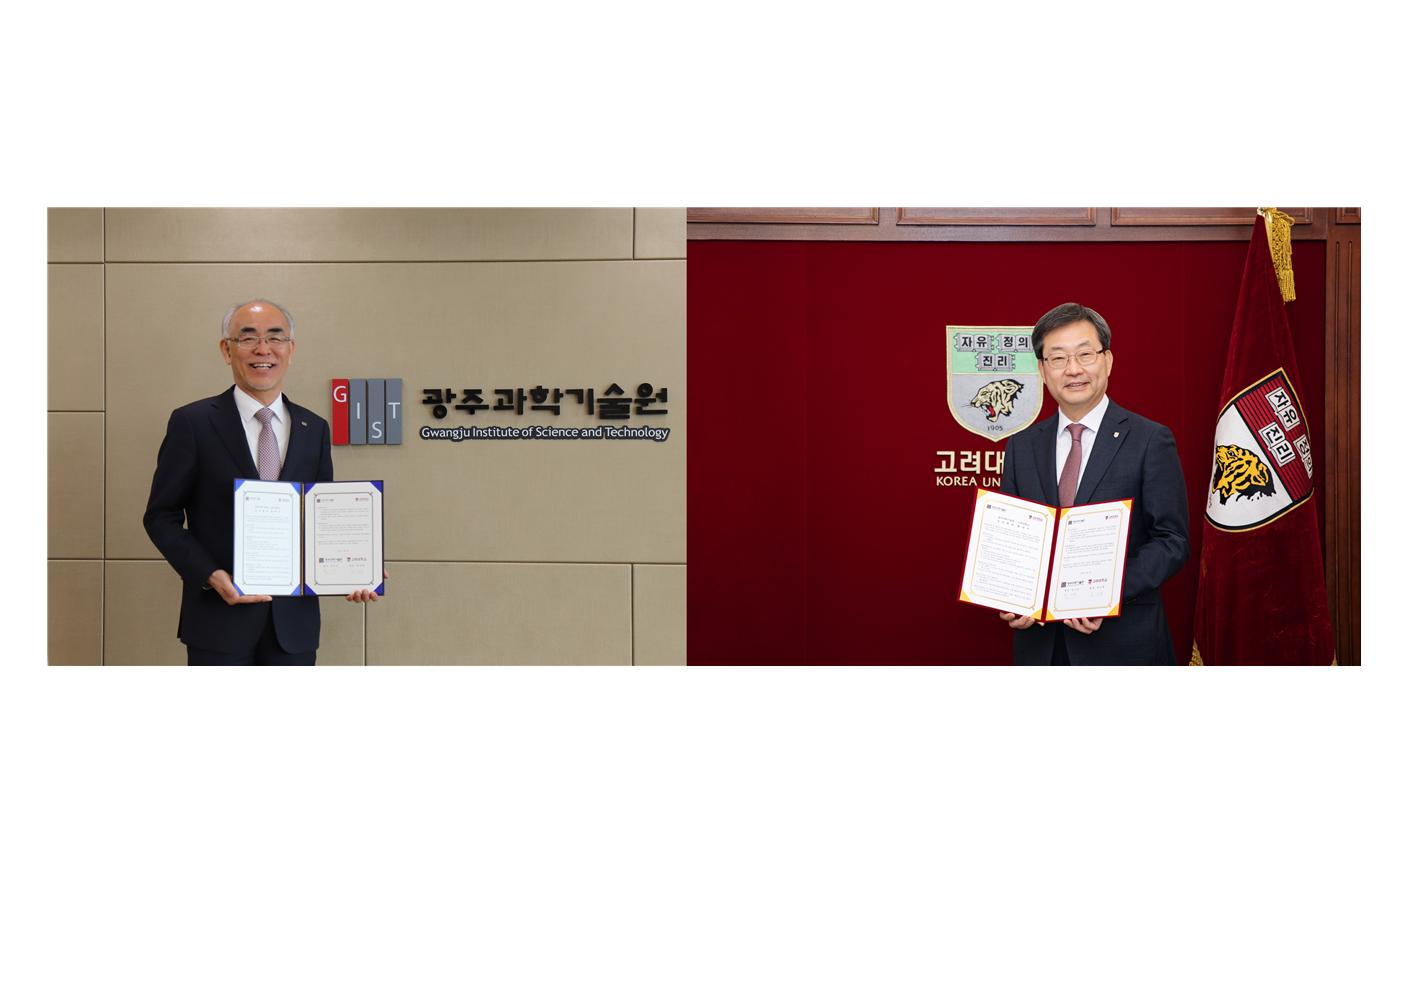 GIST and Korea University sign a business agreement (MoU) to promote AI education and research 이미지